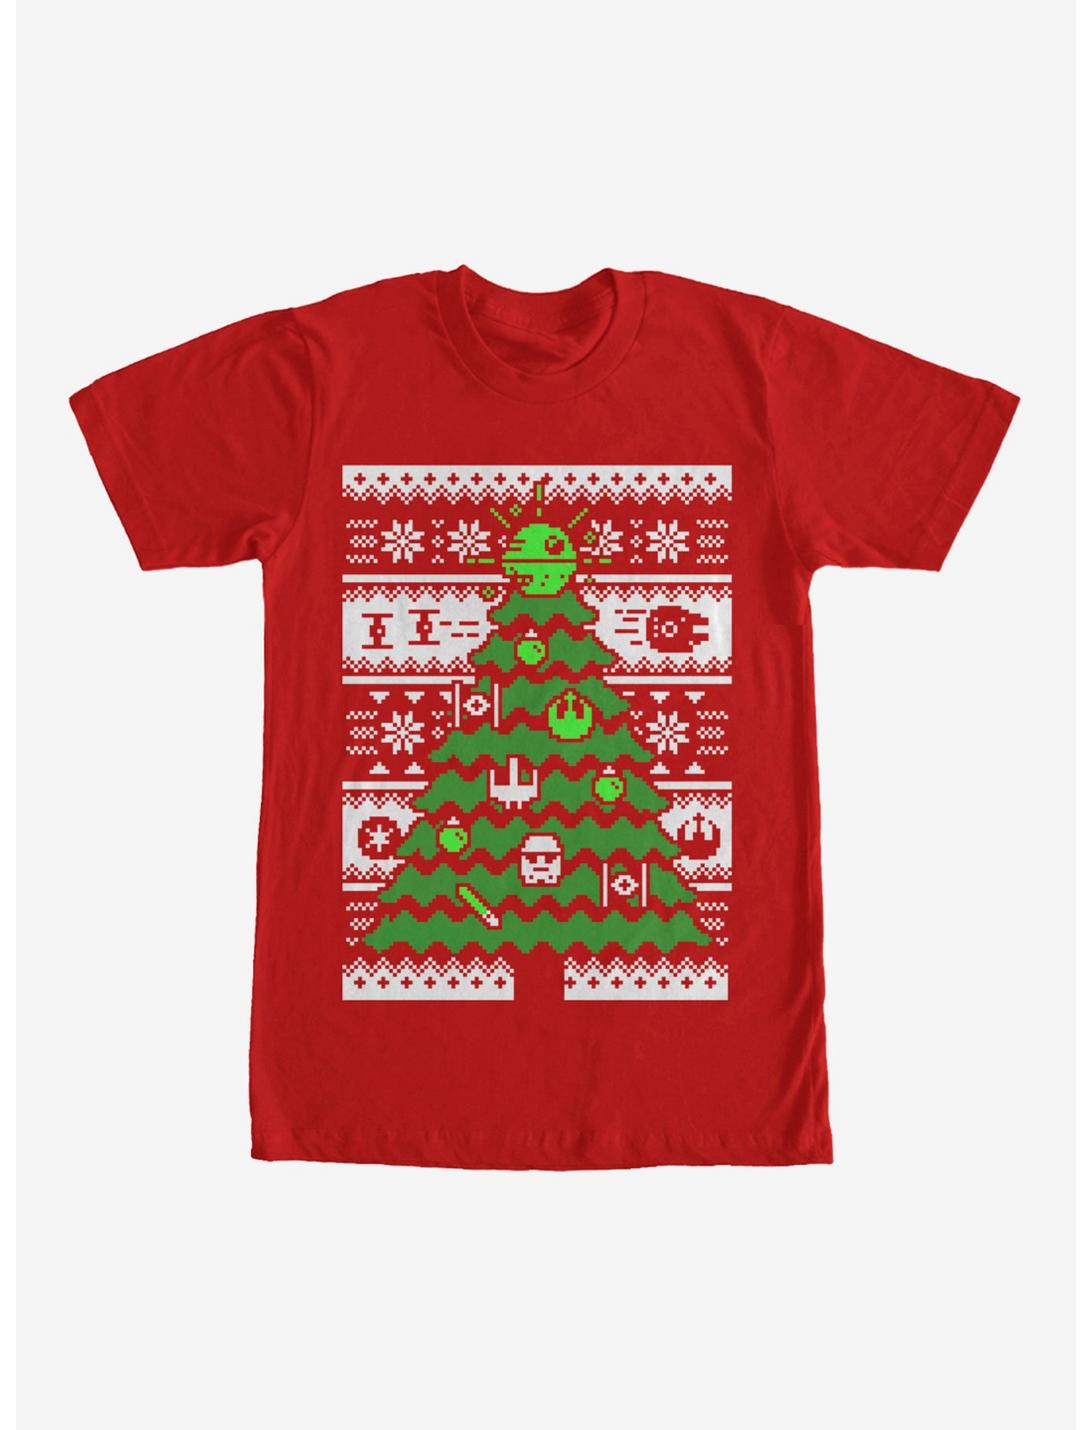 Star Wars Ugly Christmas Sweater Tree T-Shirt, RED, hi-res